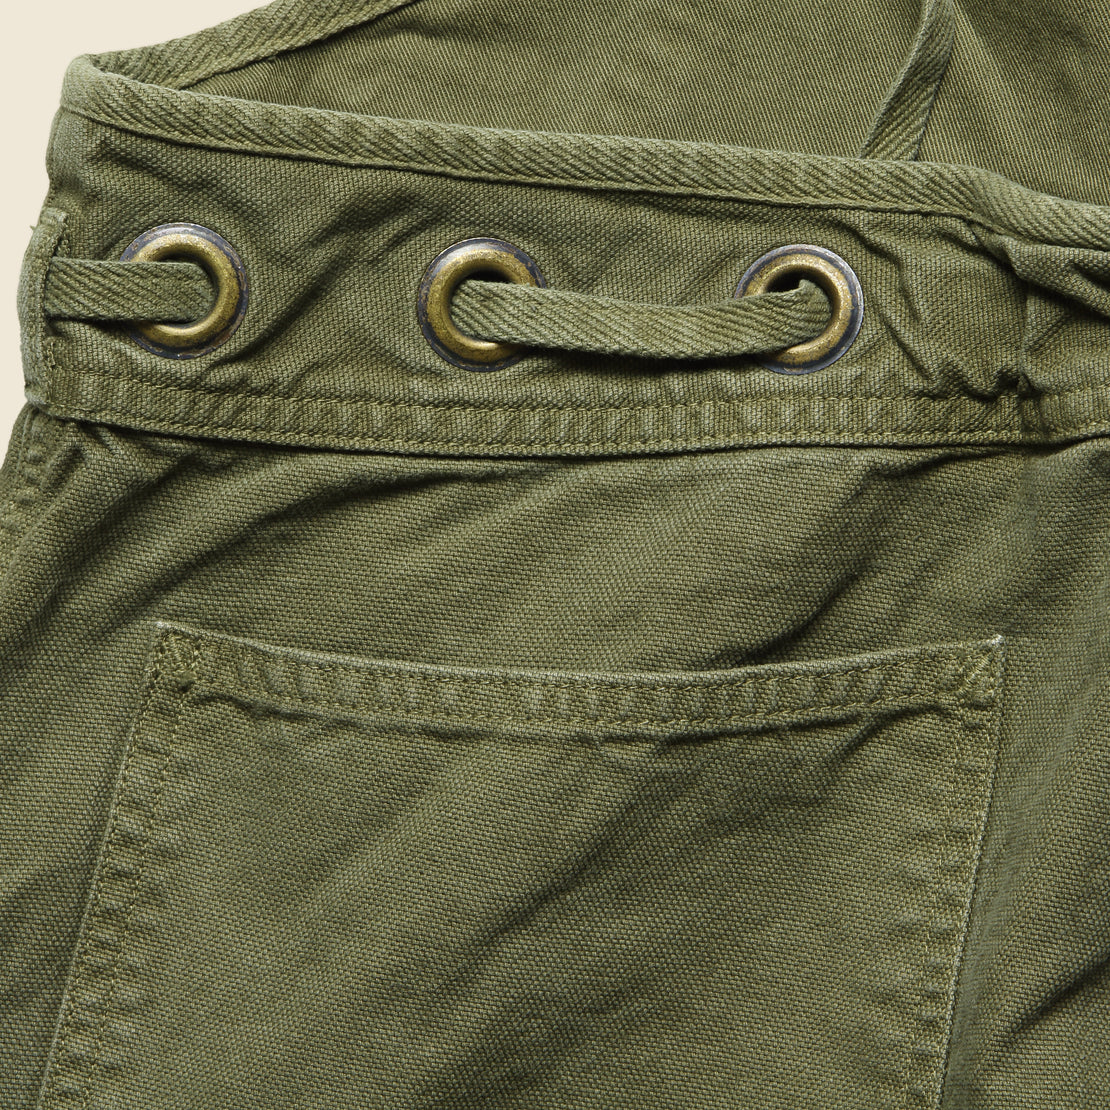 Lightweight Canvas Welder Overall - Khaki - Kapital - STAG Provisions - W - Onepiece - Overalls